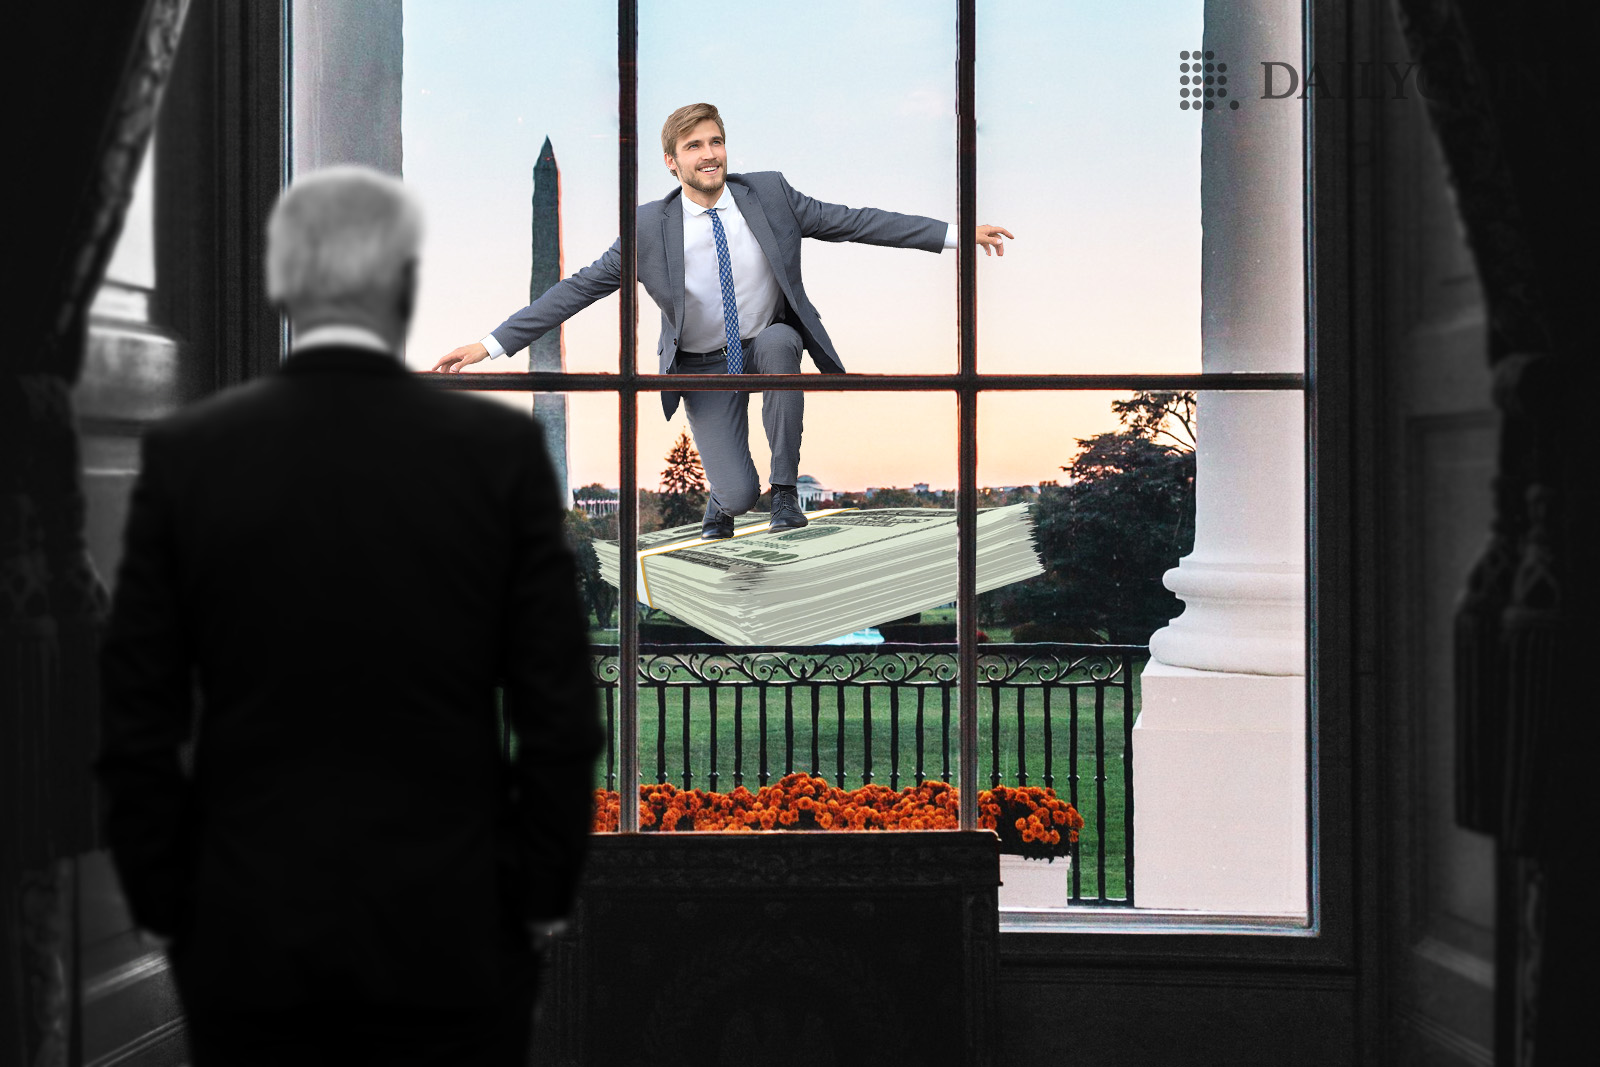 Man standing on a pile of money in front of Biden's White House window, as the president is looking outside.